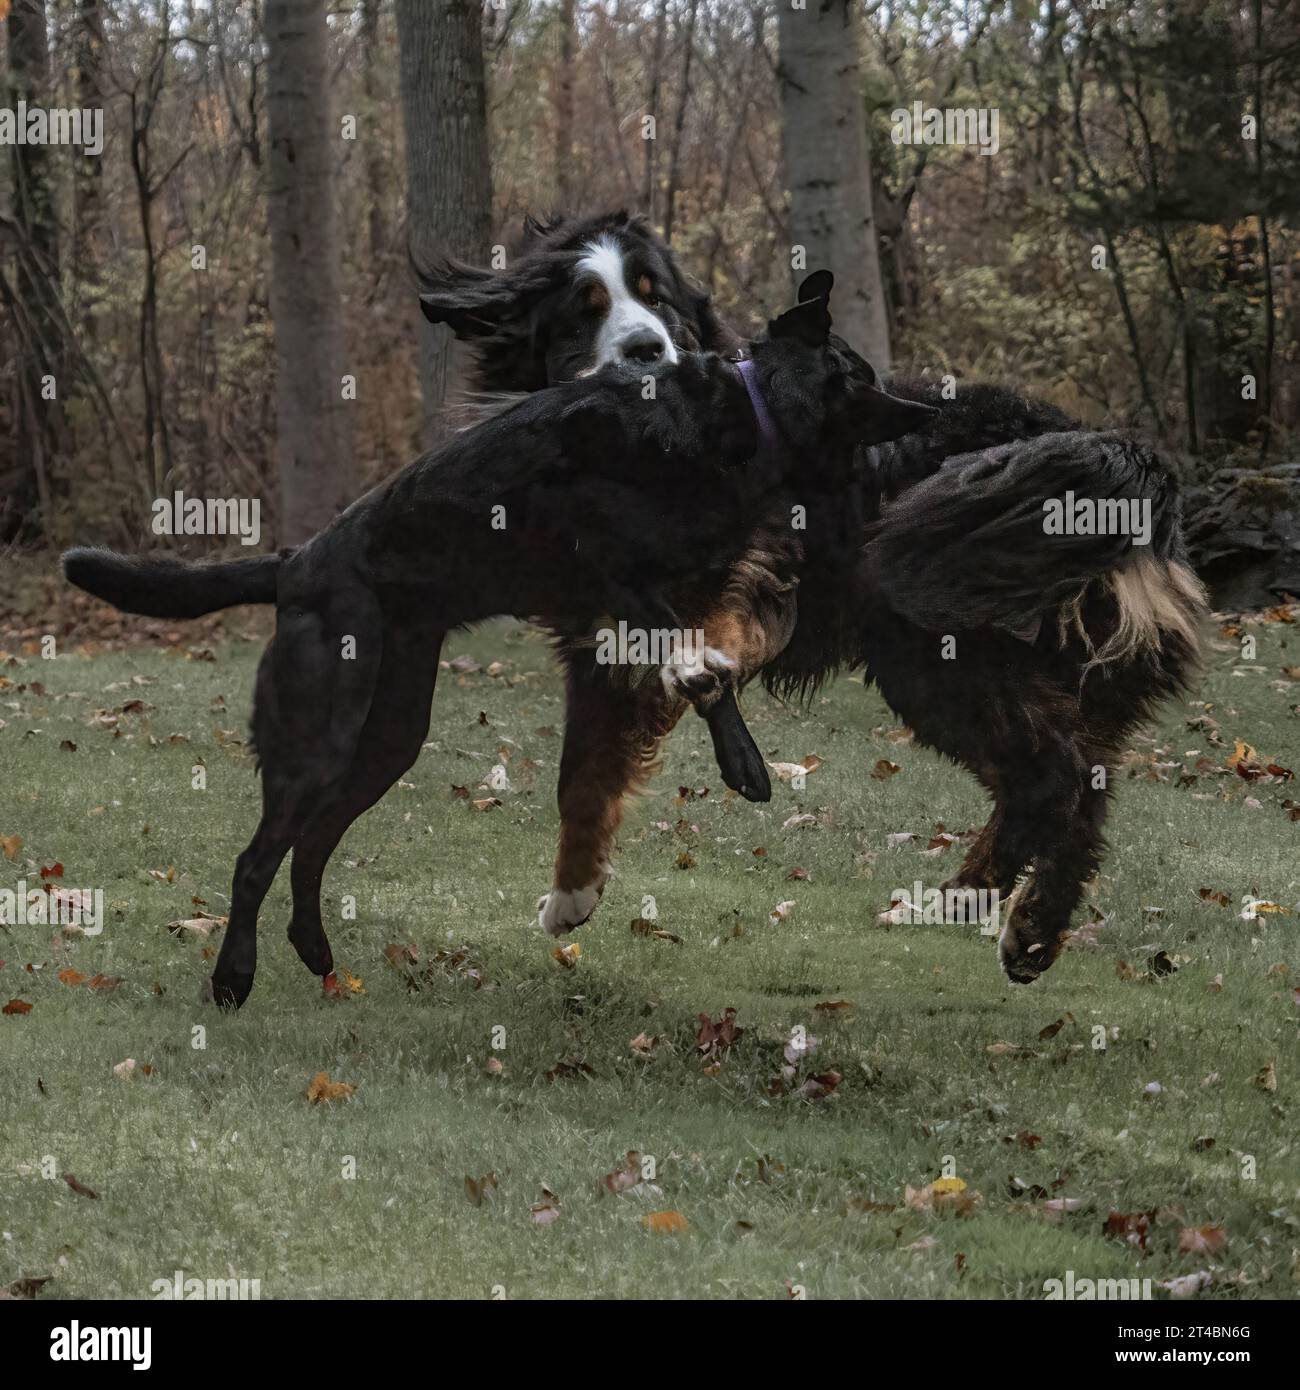 A black Labrador Retriever and a Bernese Mountain Dog leap about as they play together. Stock Photo